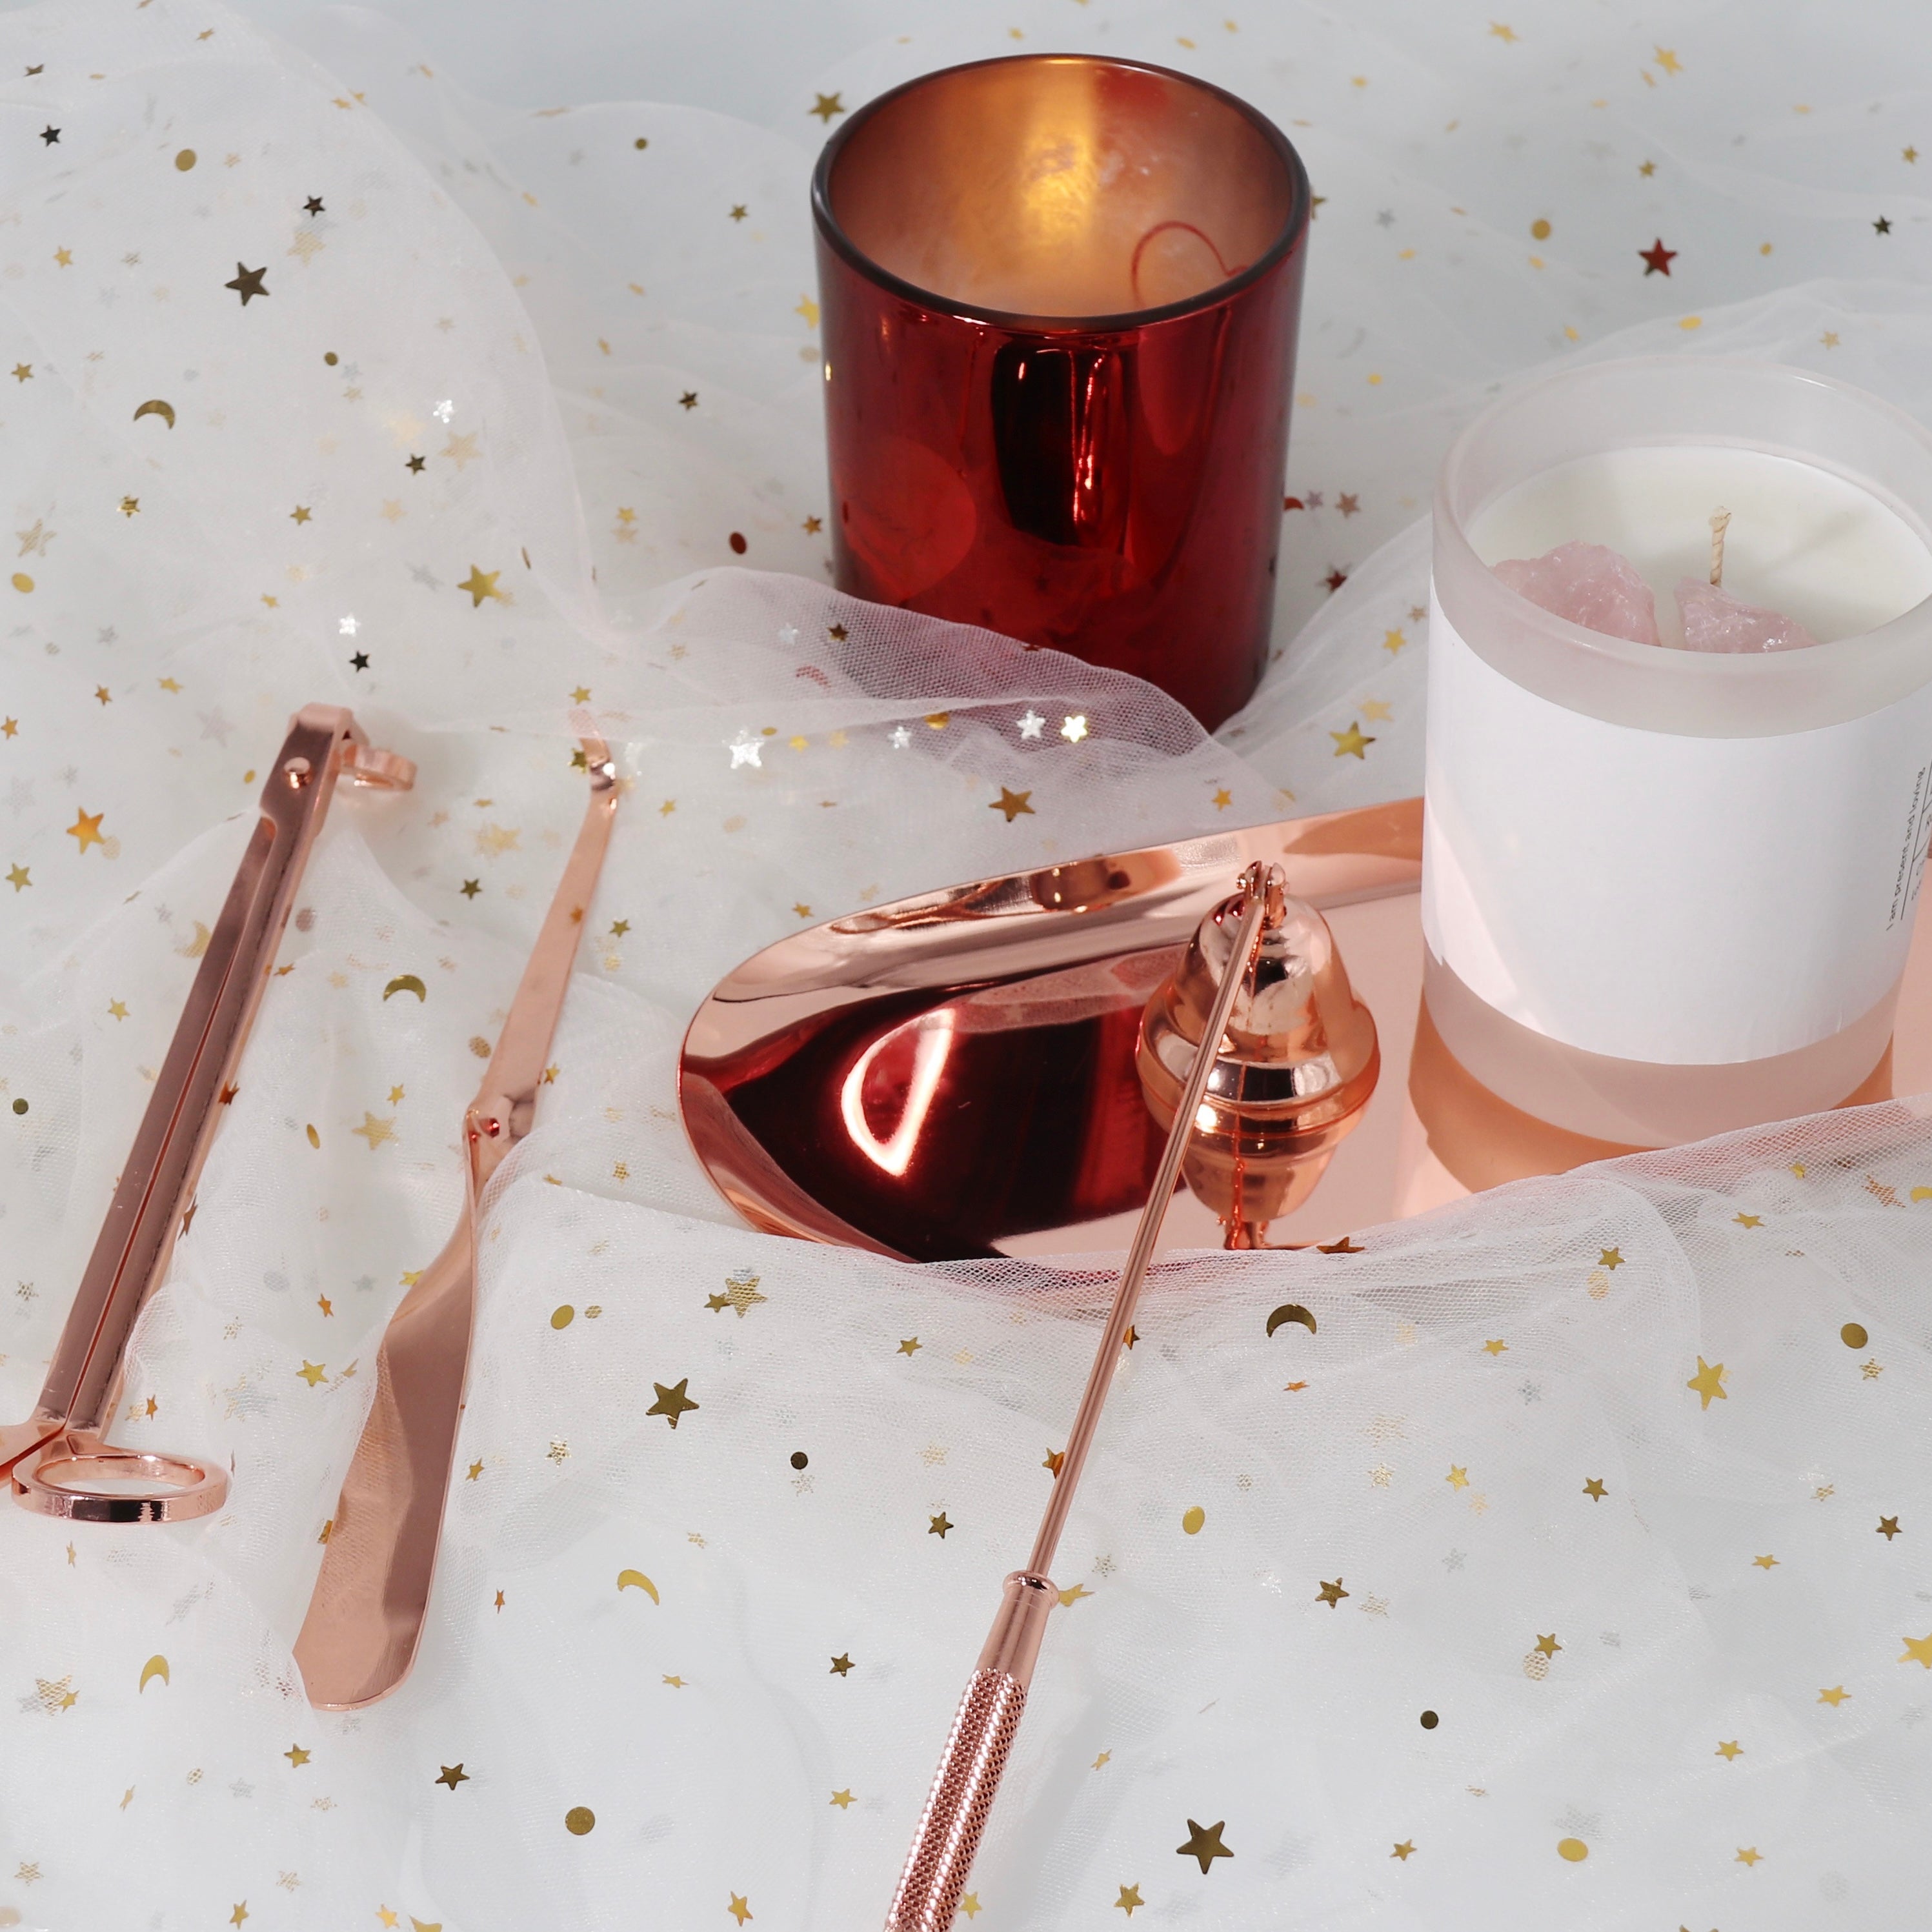 Rose Gold Candle Accessory Set - 4 in 1